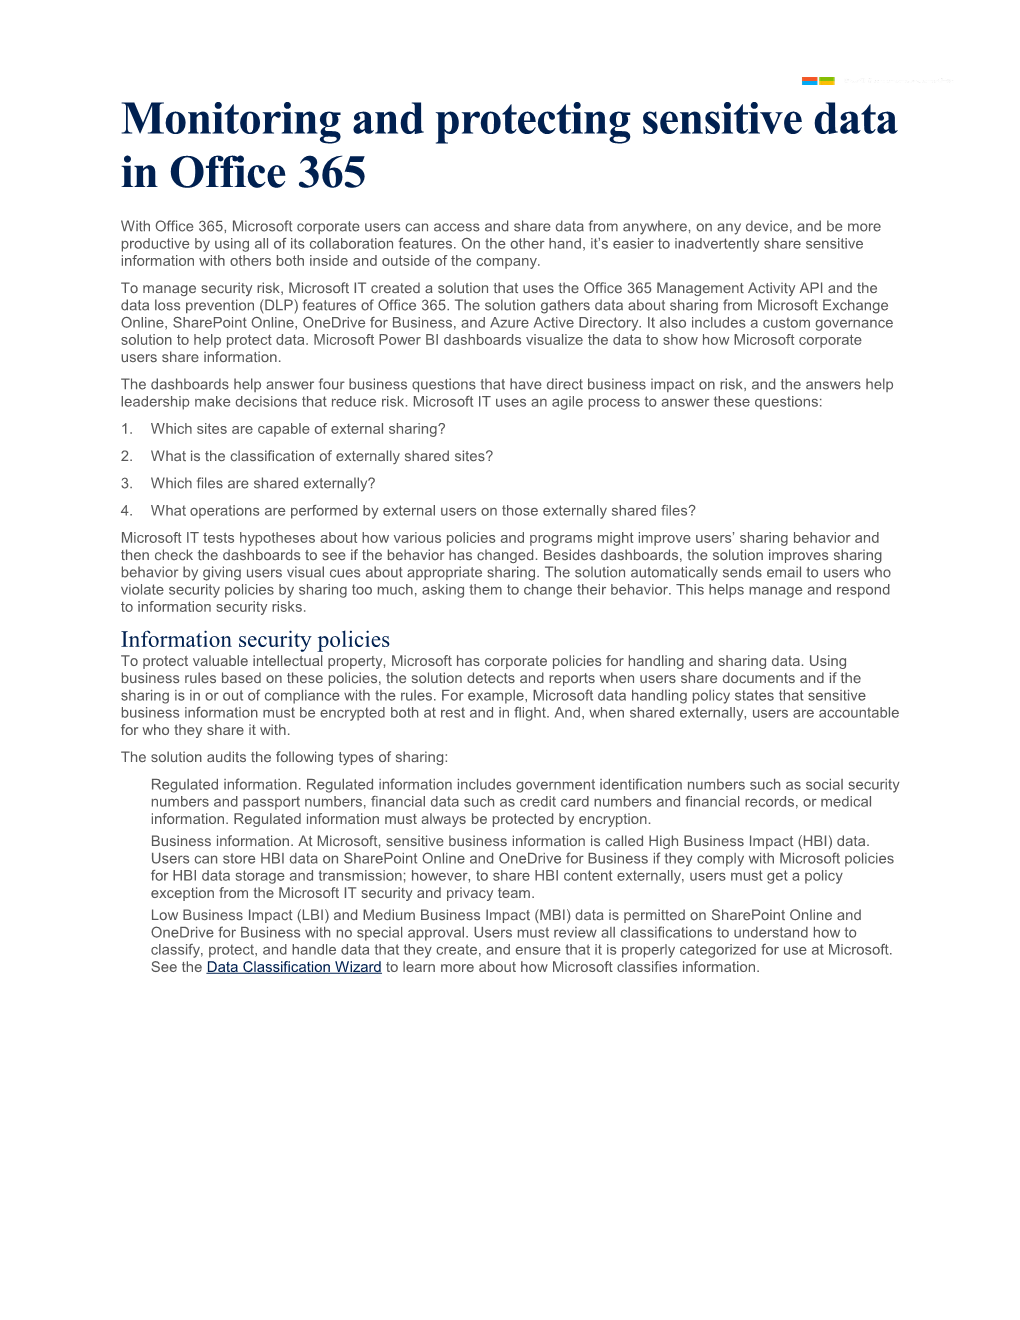 Monitoring and Protecting Sensitive Data in Office 365